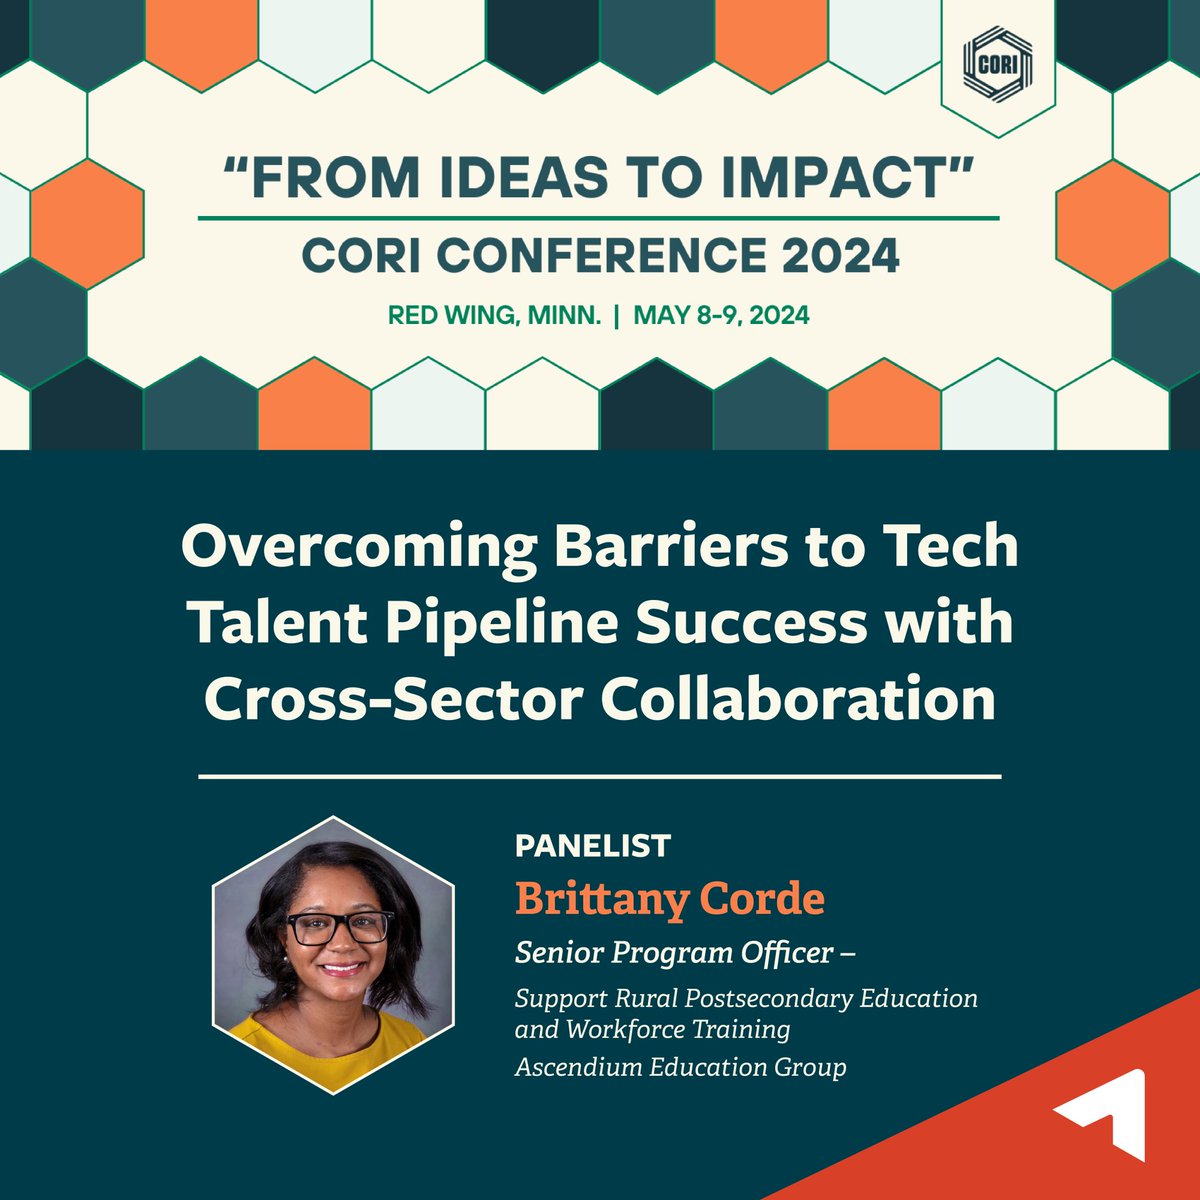 At the @Ruralinno Conference, Senior Program Officer Brittany Corde will join leaders from UNM-Taos Hive and @AZRegionalEDF for a discussion on the impact of cross-sector collaboration on technology talent development. If you’re attending, join this session at 2:30 p.m. CT on May